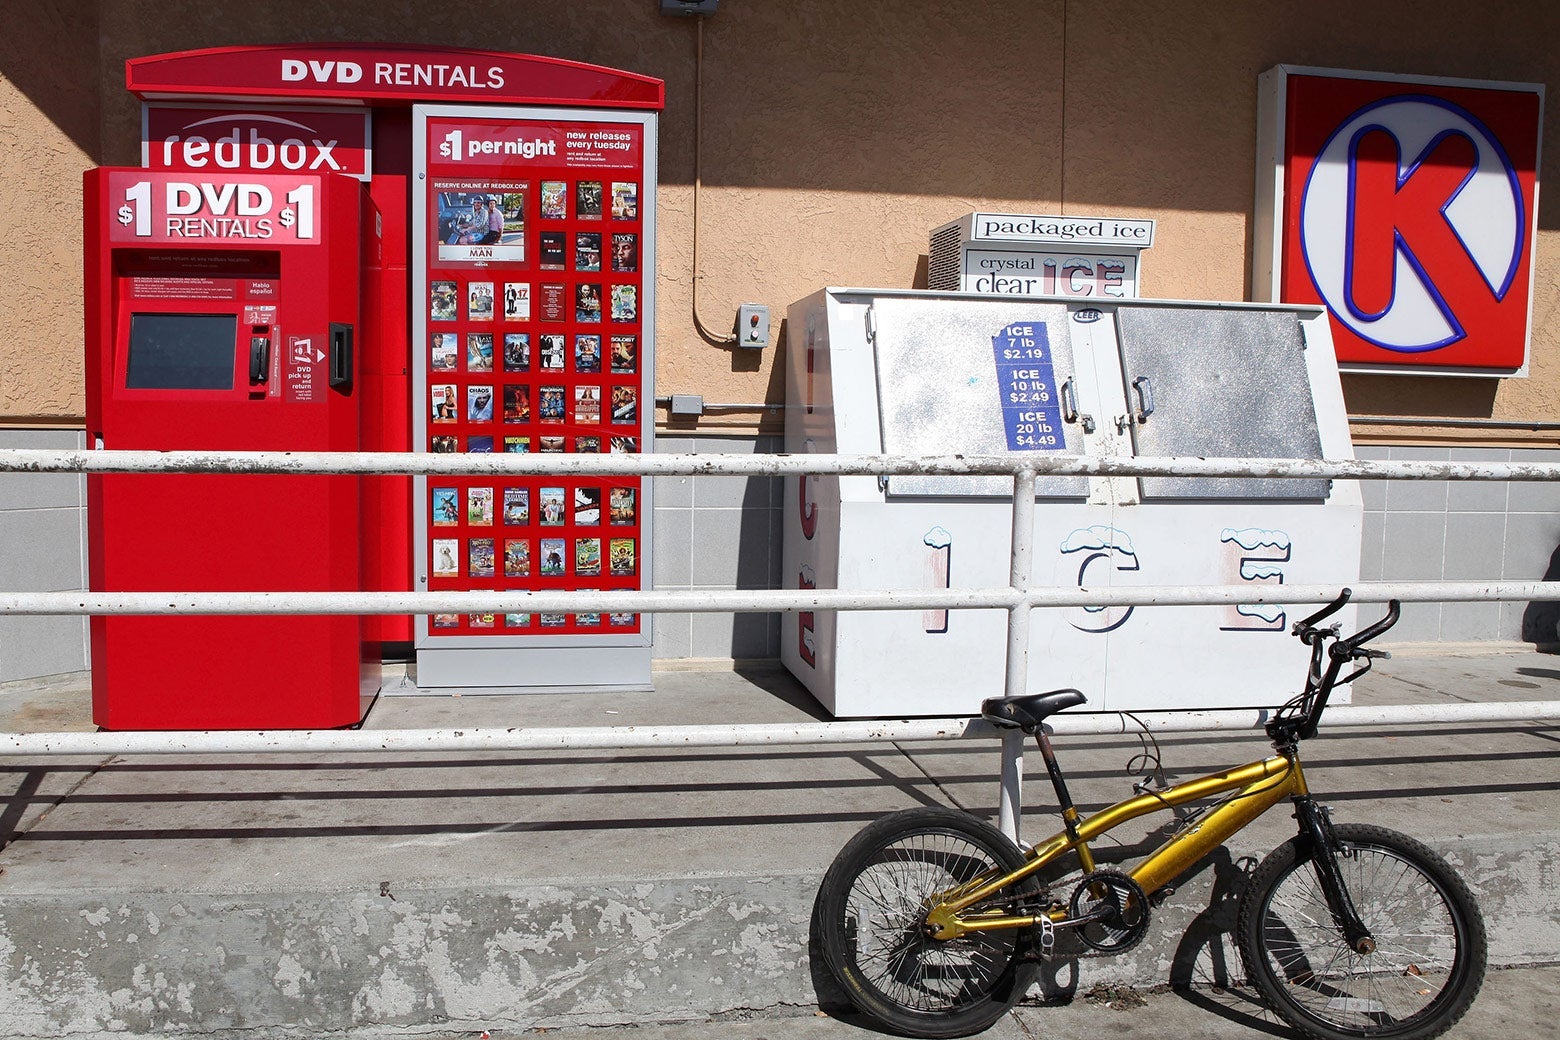 A RedBox video rental kiosk in front of a gas station. A yellow bike is parked nearby.